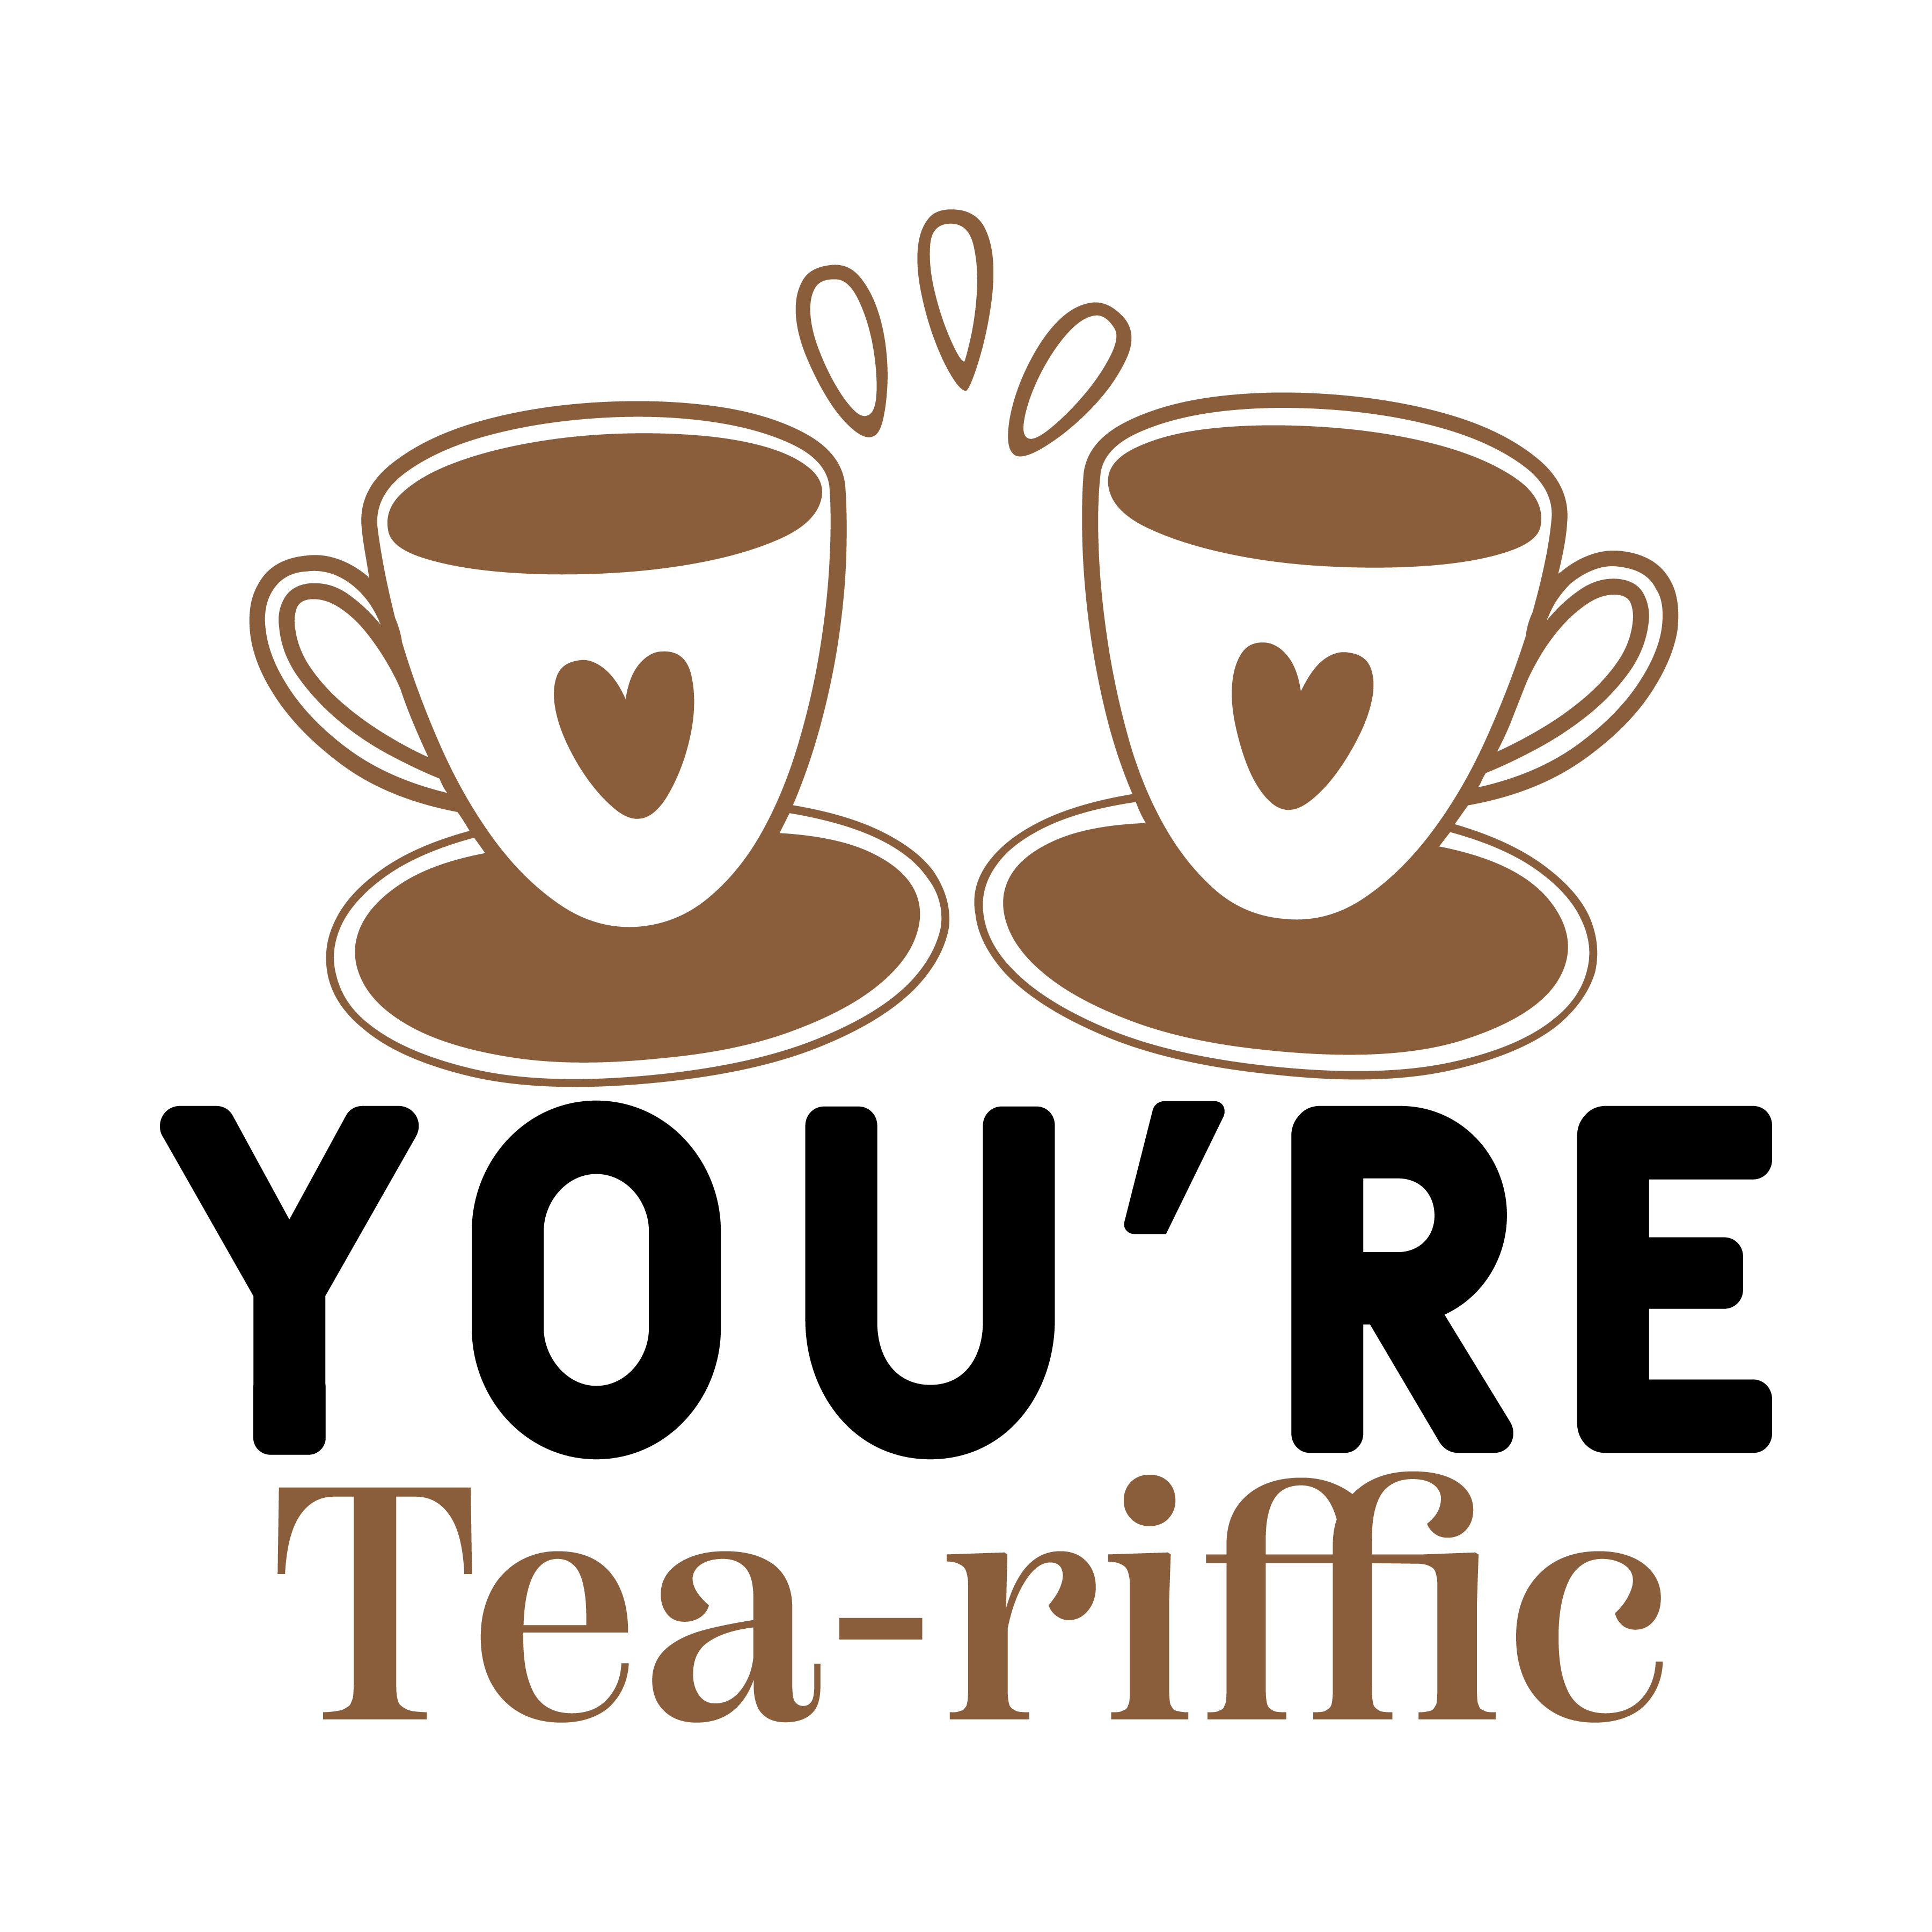 you re tea riffic, tea sayings, tea quotes, Cricut designs, free, clip art, svg file, template, pattern, stencil, silhouette, cut file, design space, short, funny, shirt, cup, DIY crafts and projects, embroidery